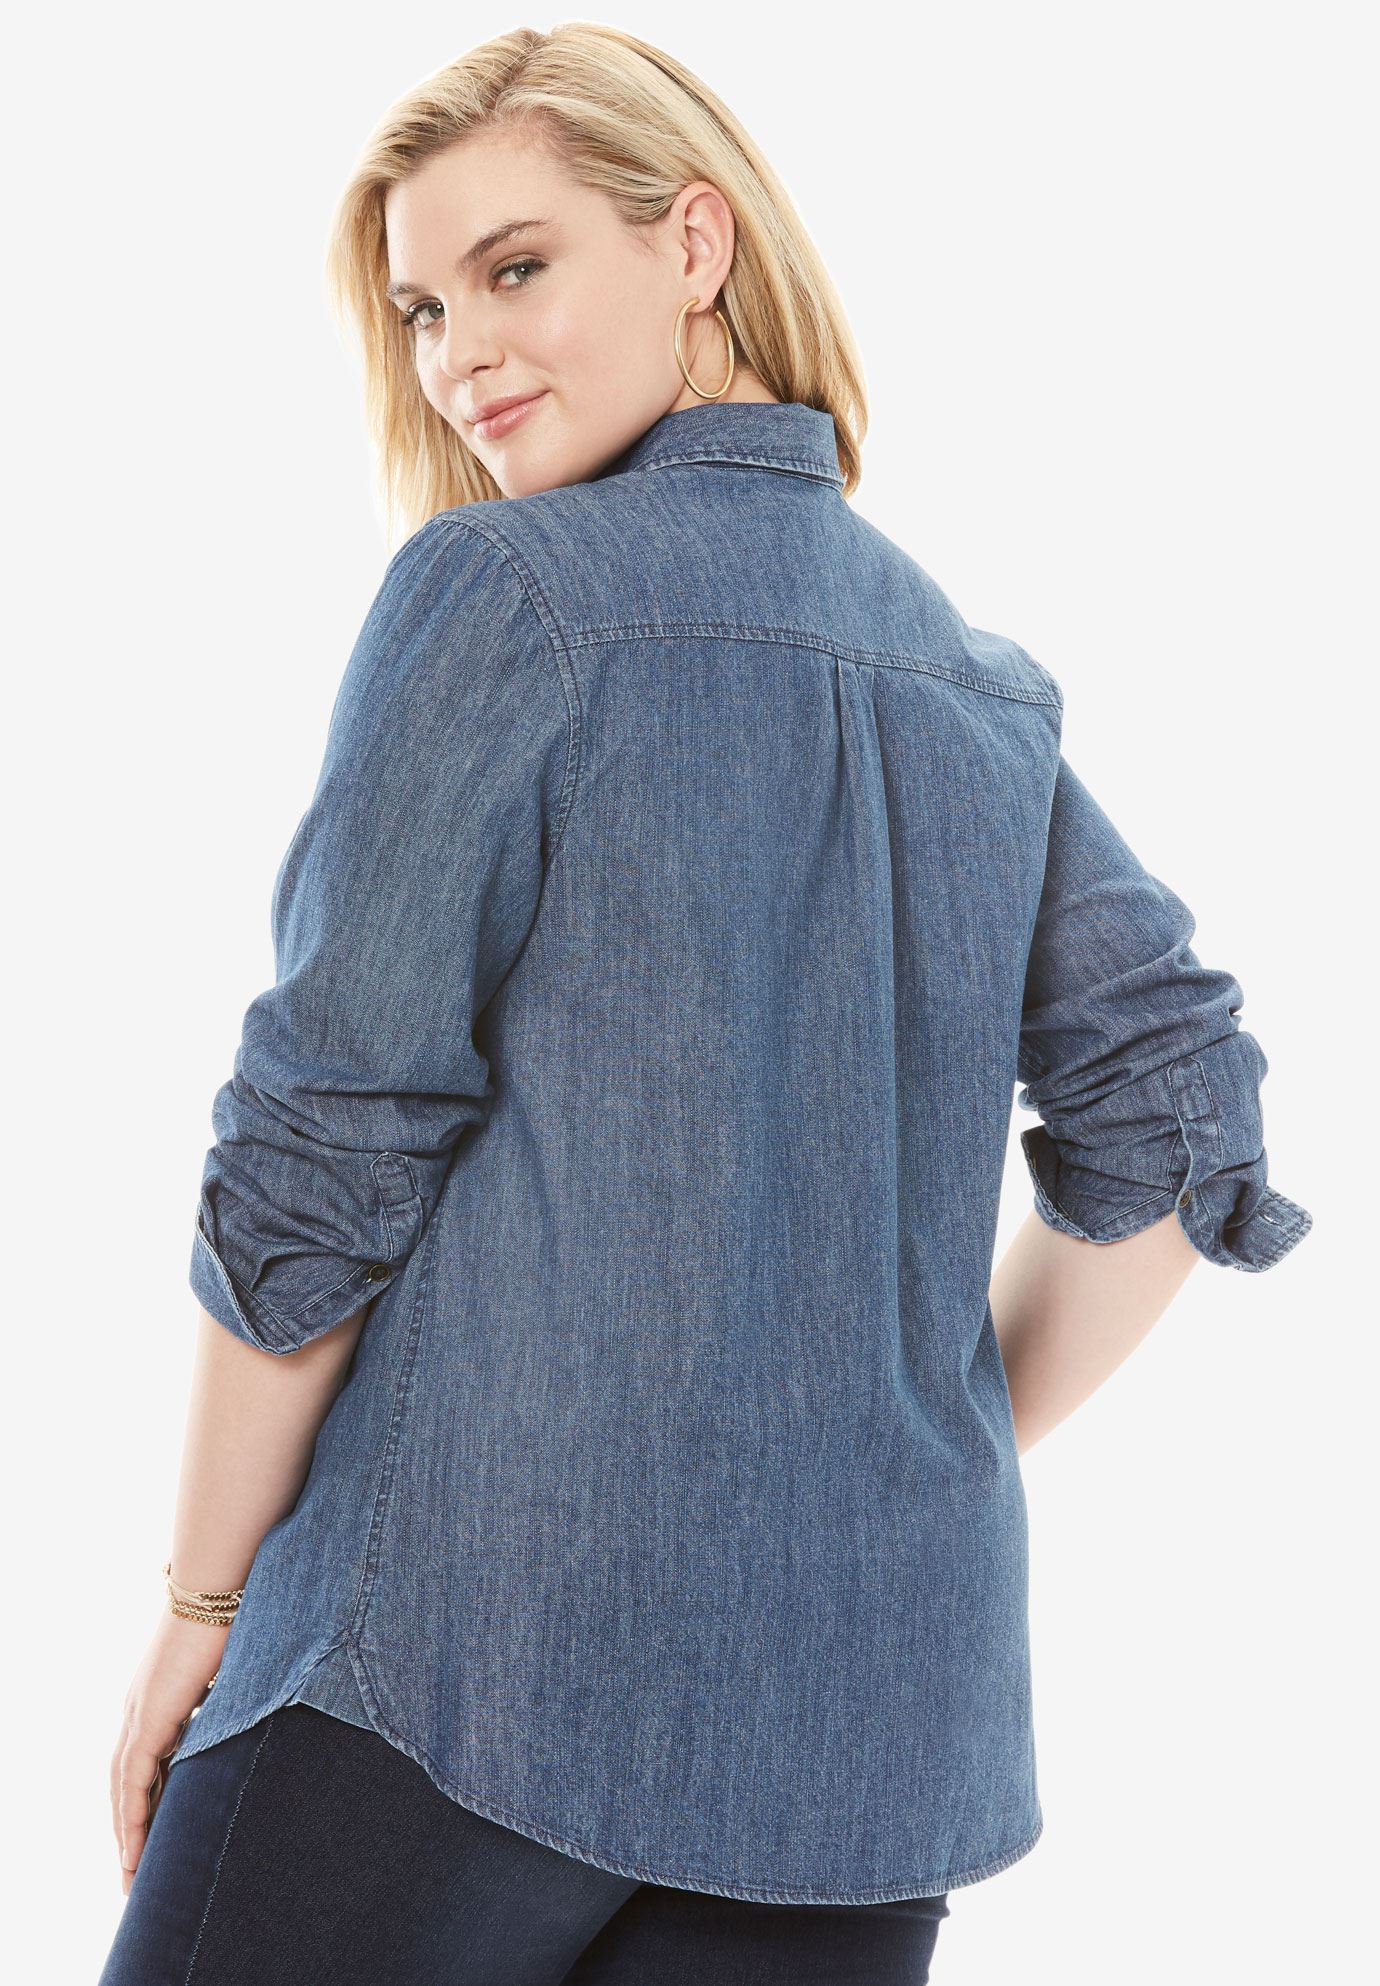 Embroidered Denim Shirt | Fullbeauty Outlet